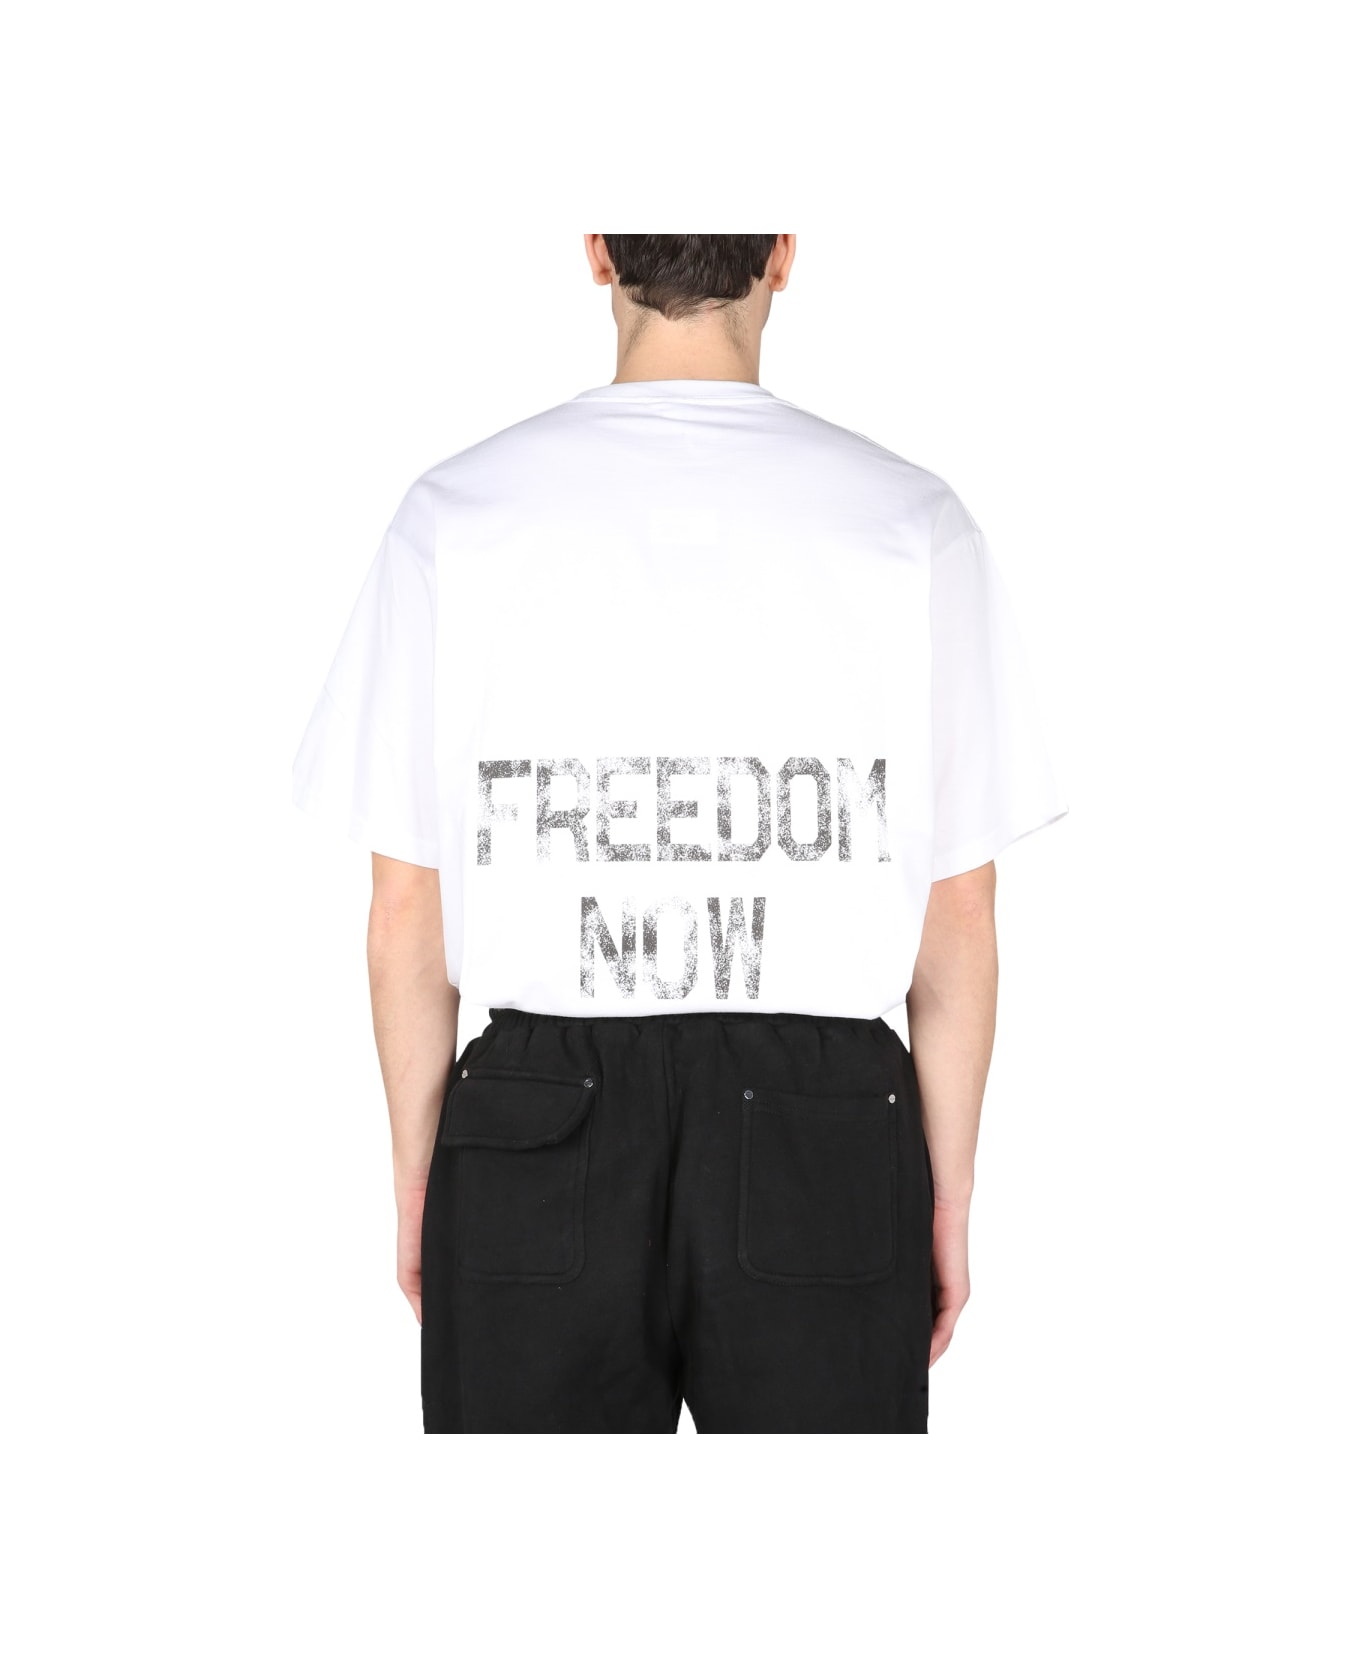 Mouty "freedom" T-shirt - WHITE シャツ